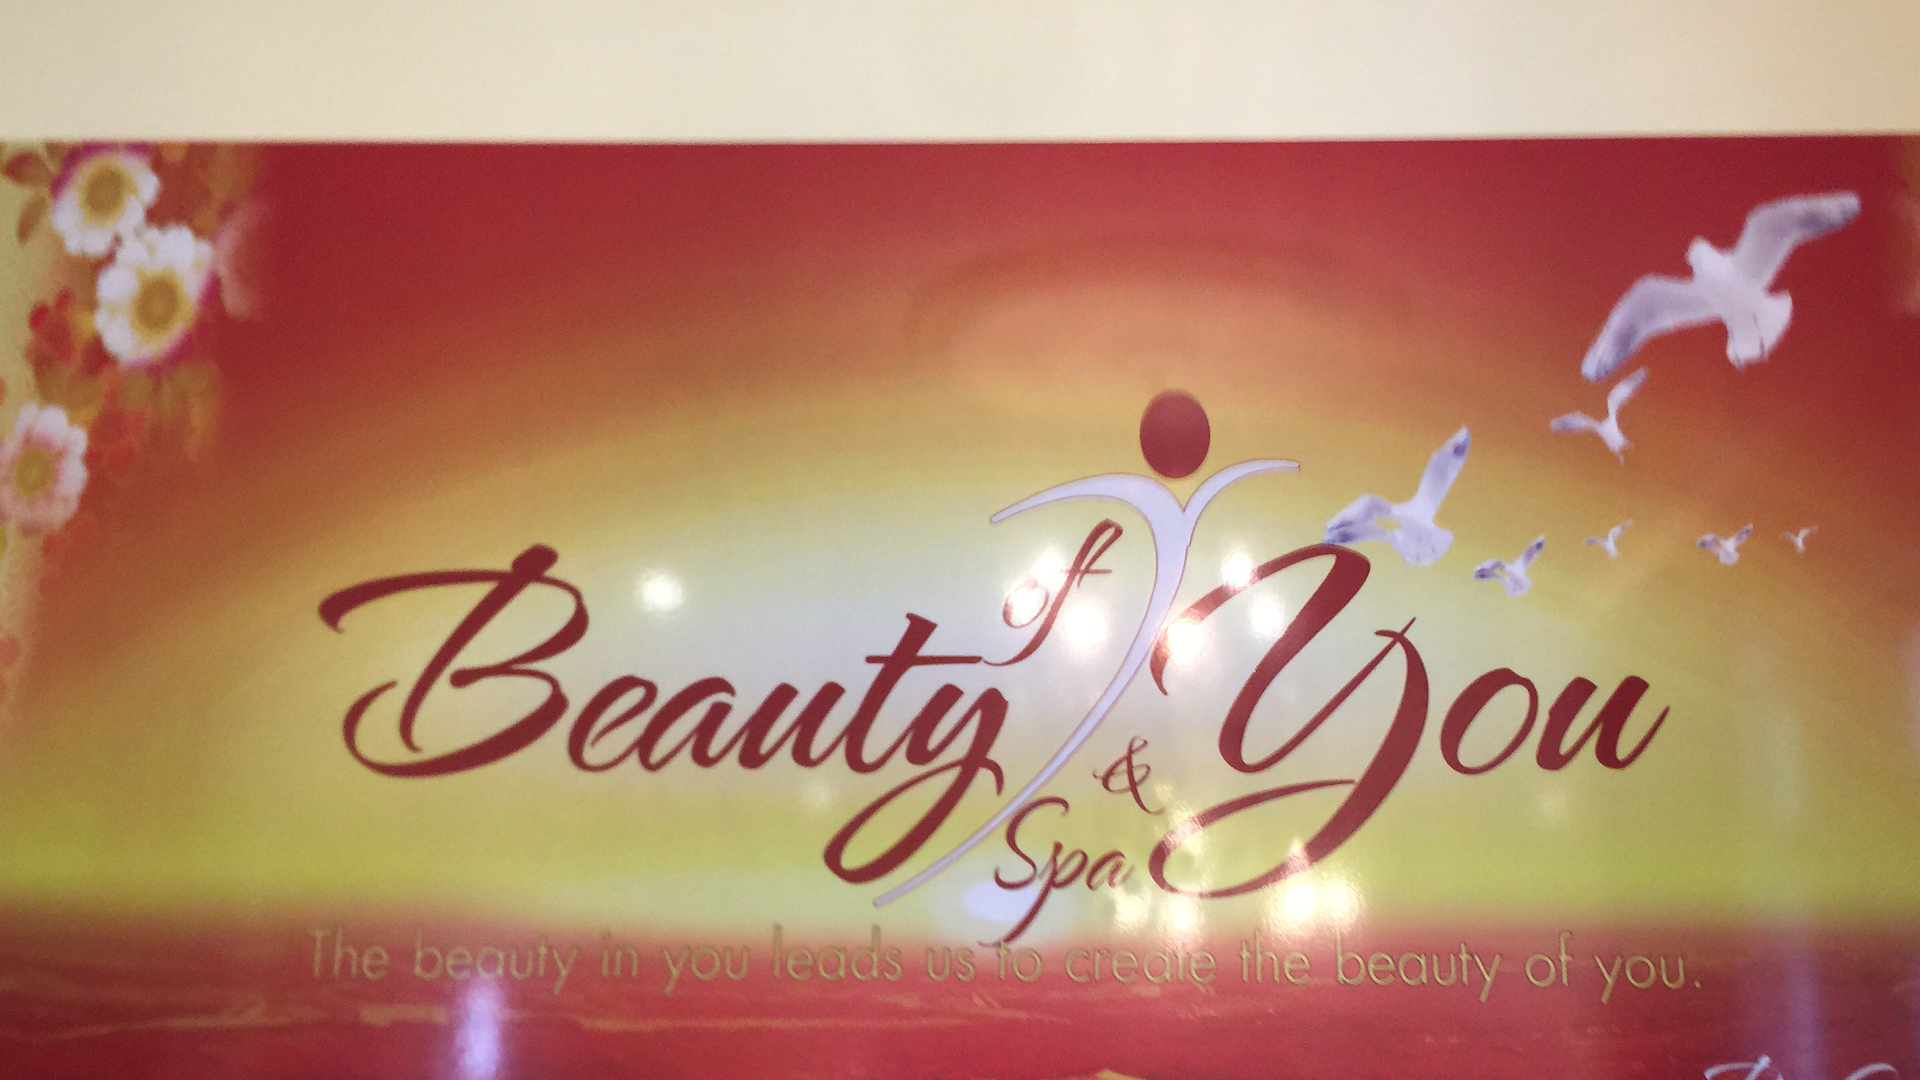 Beauty Of You & Spa